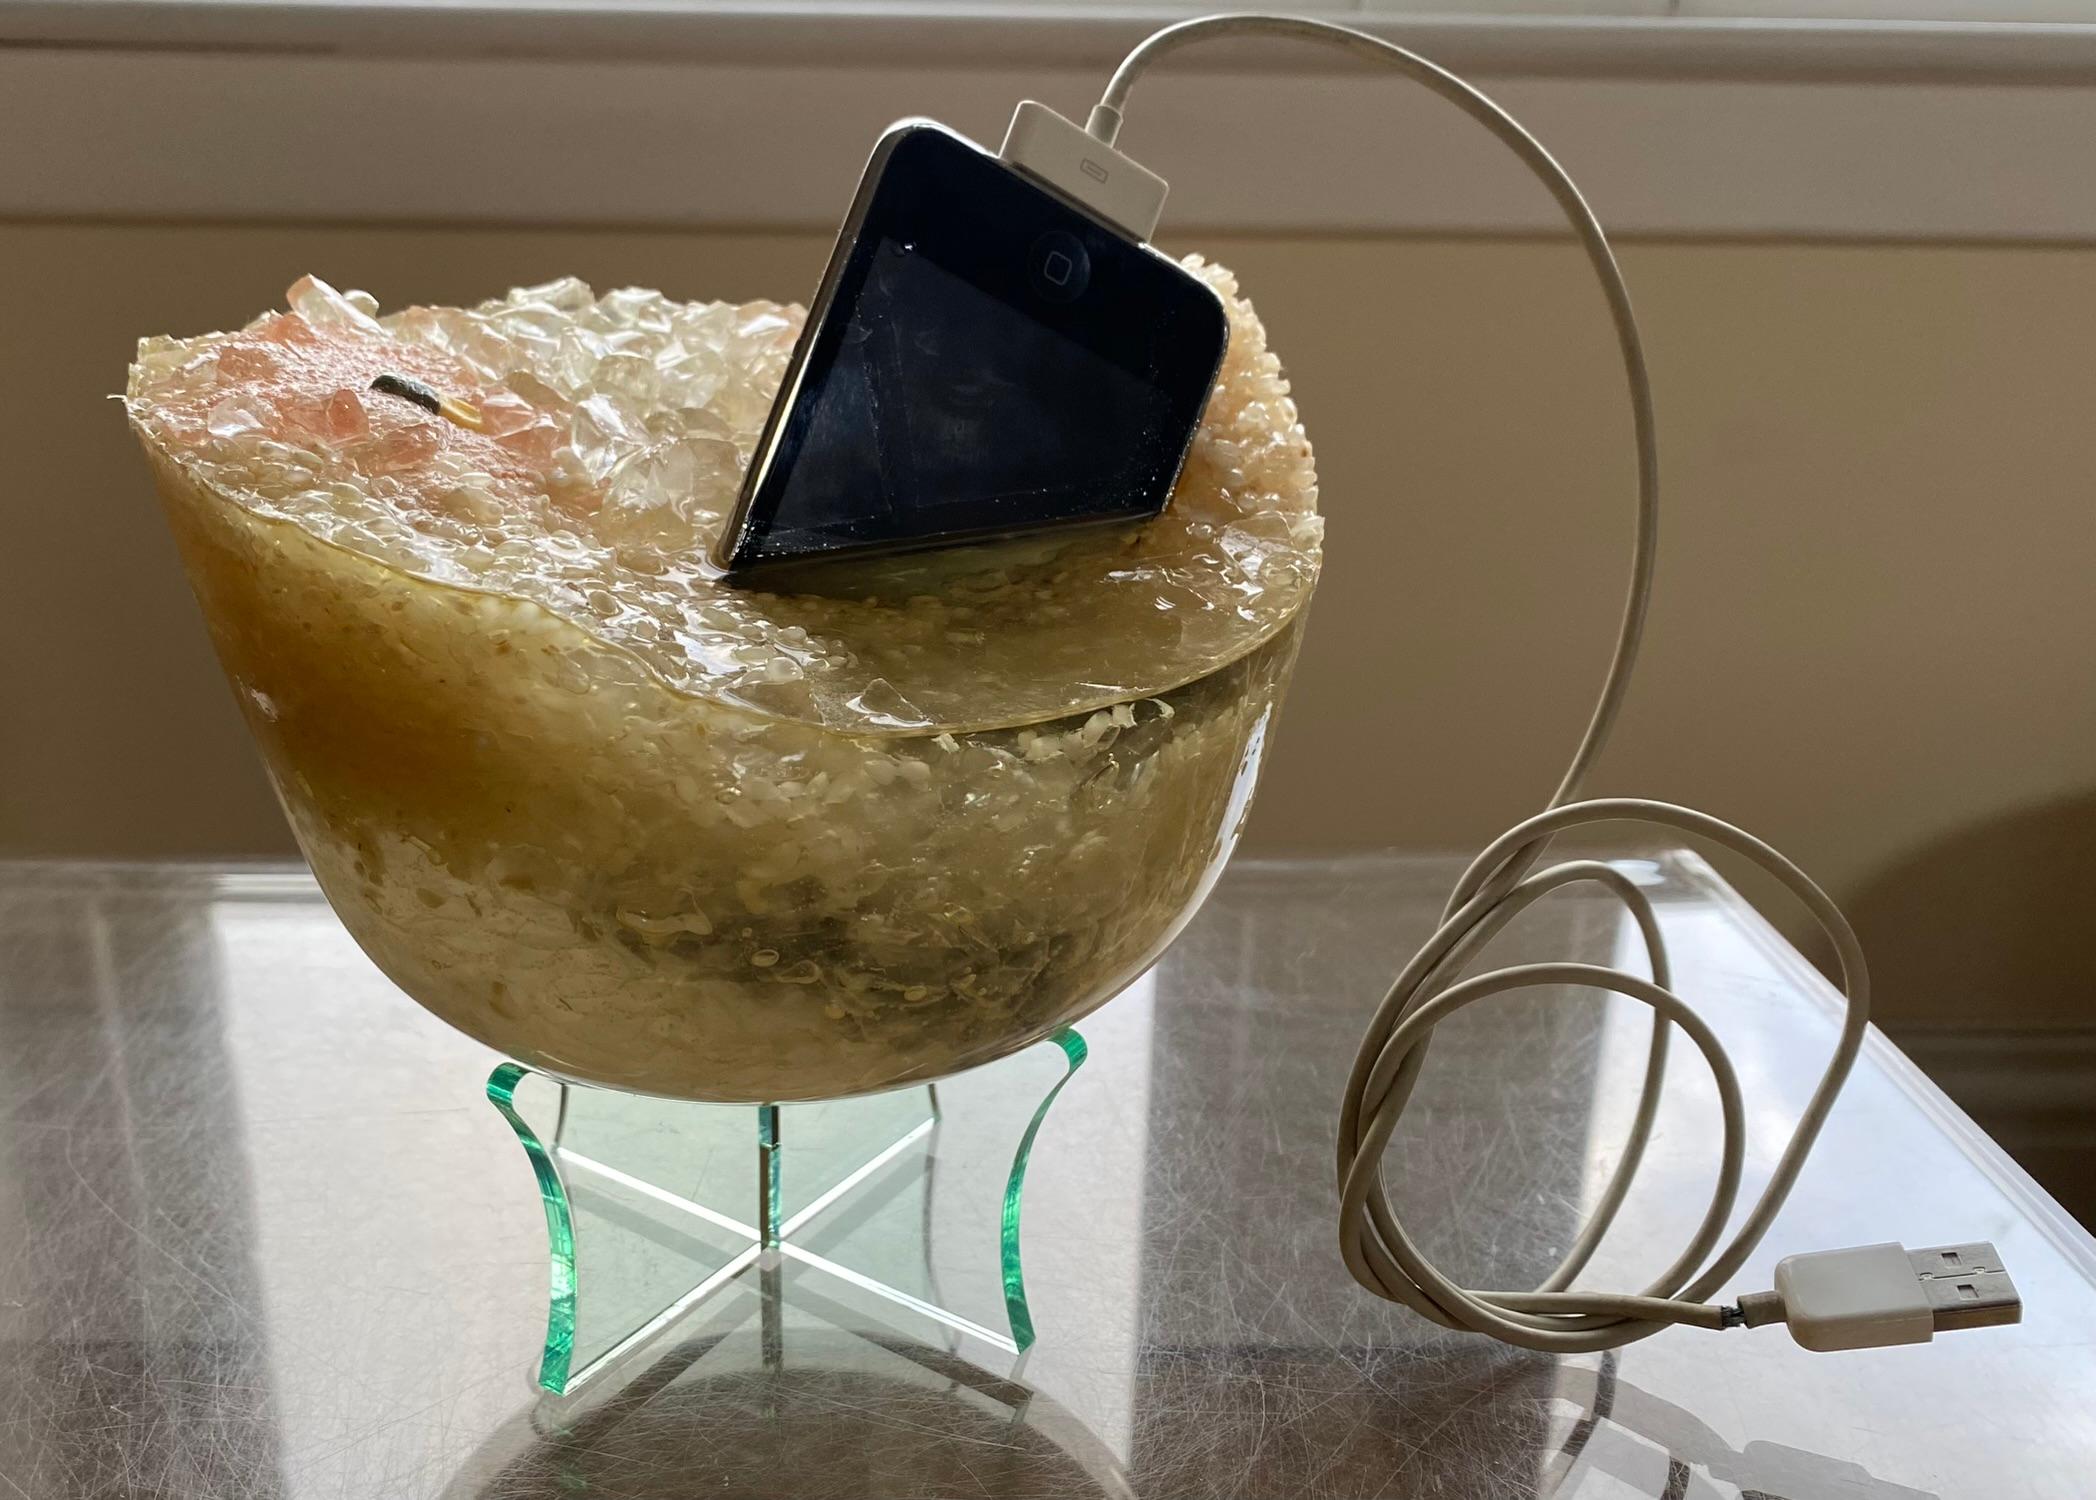 Banquet IV-Time Capsule-ipod2008-Resin Casting-UK Awarded Conceptual Artist  For Sale 10